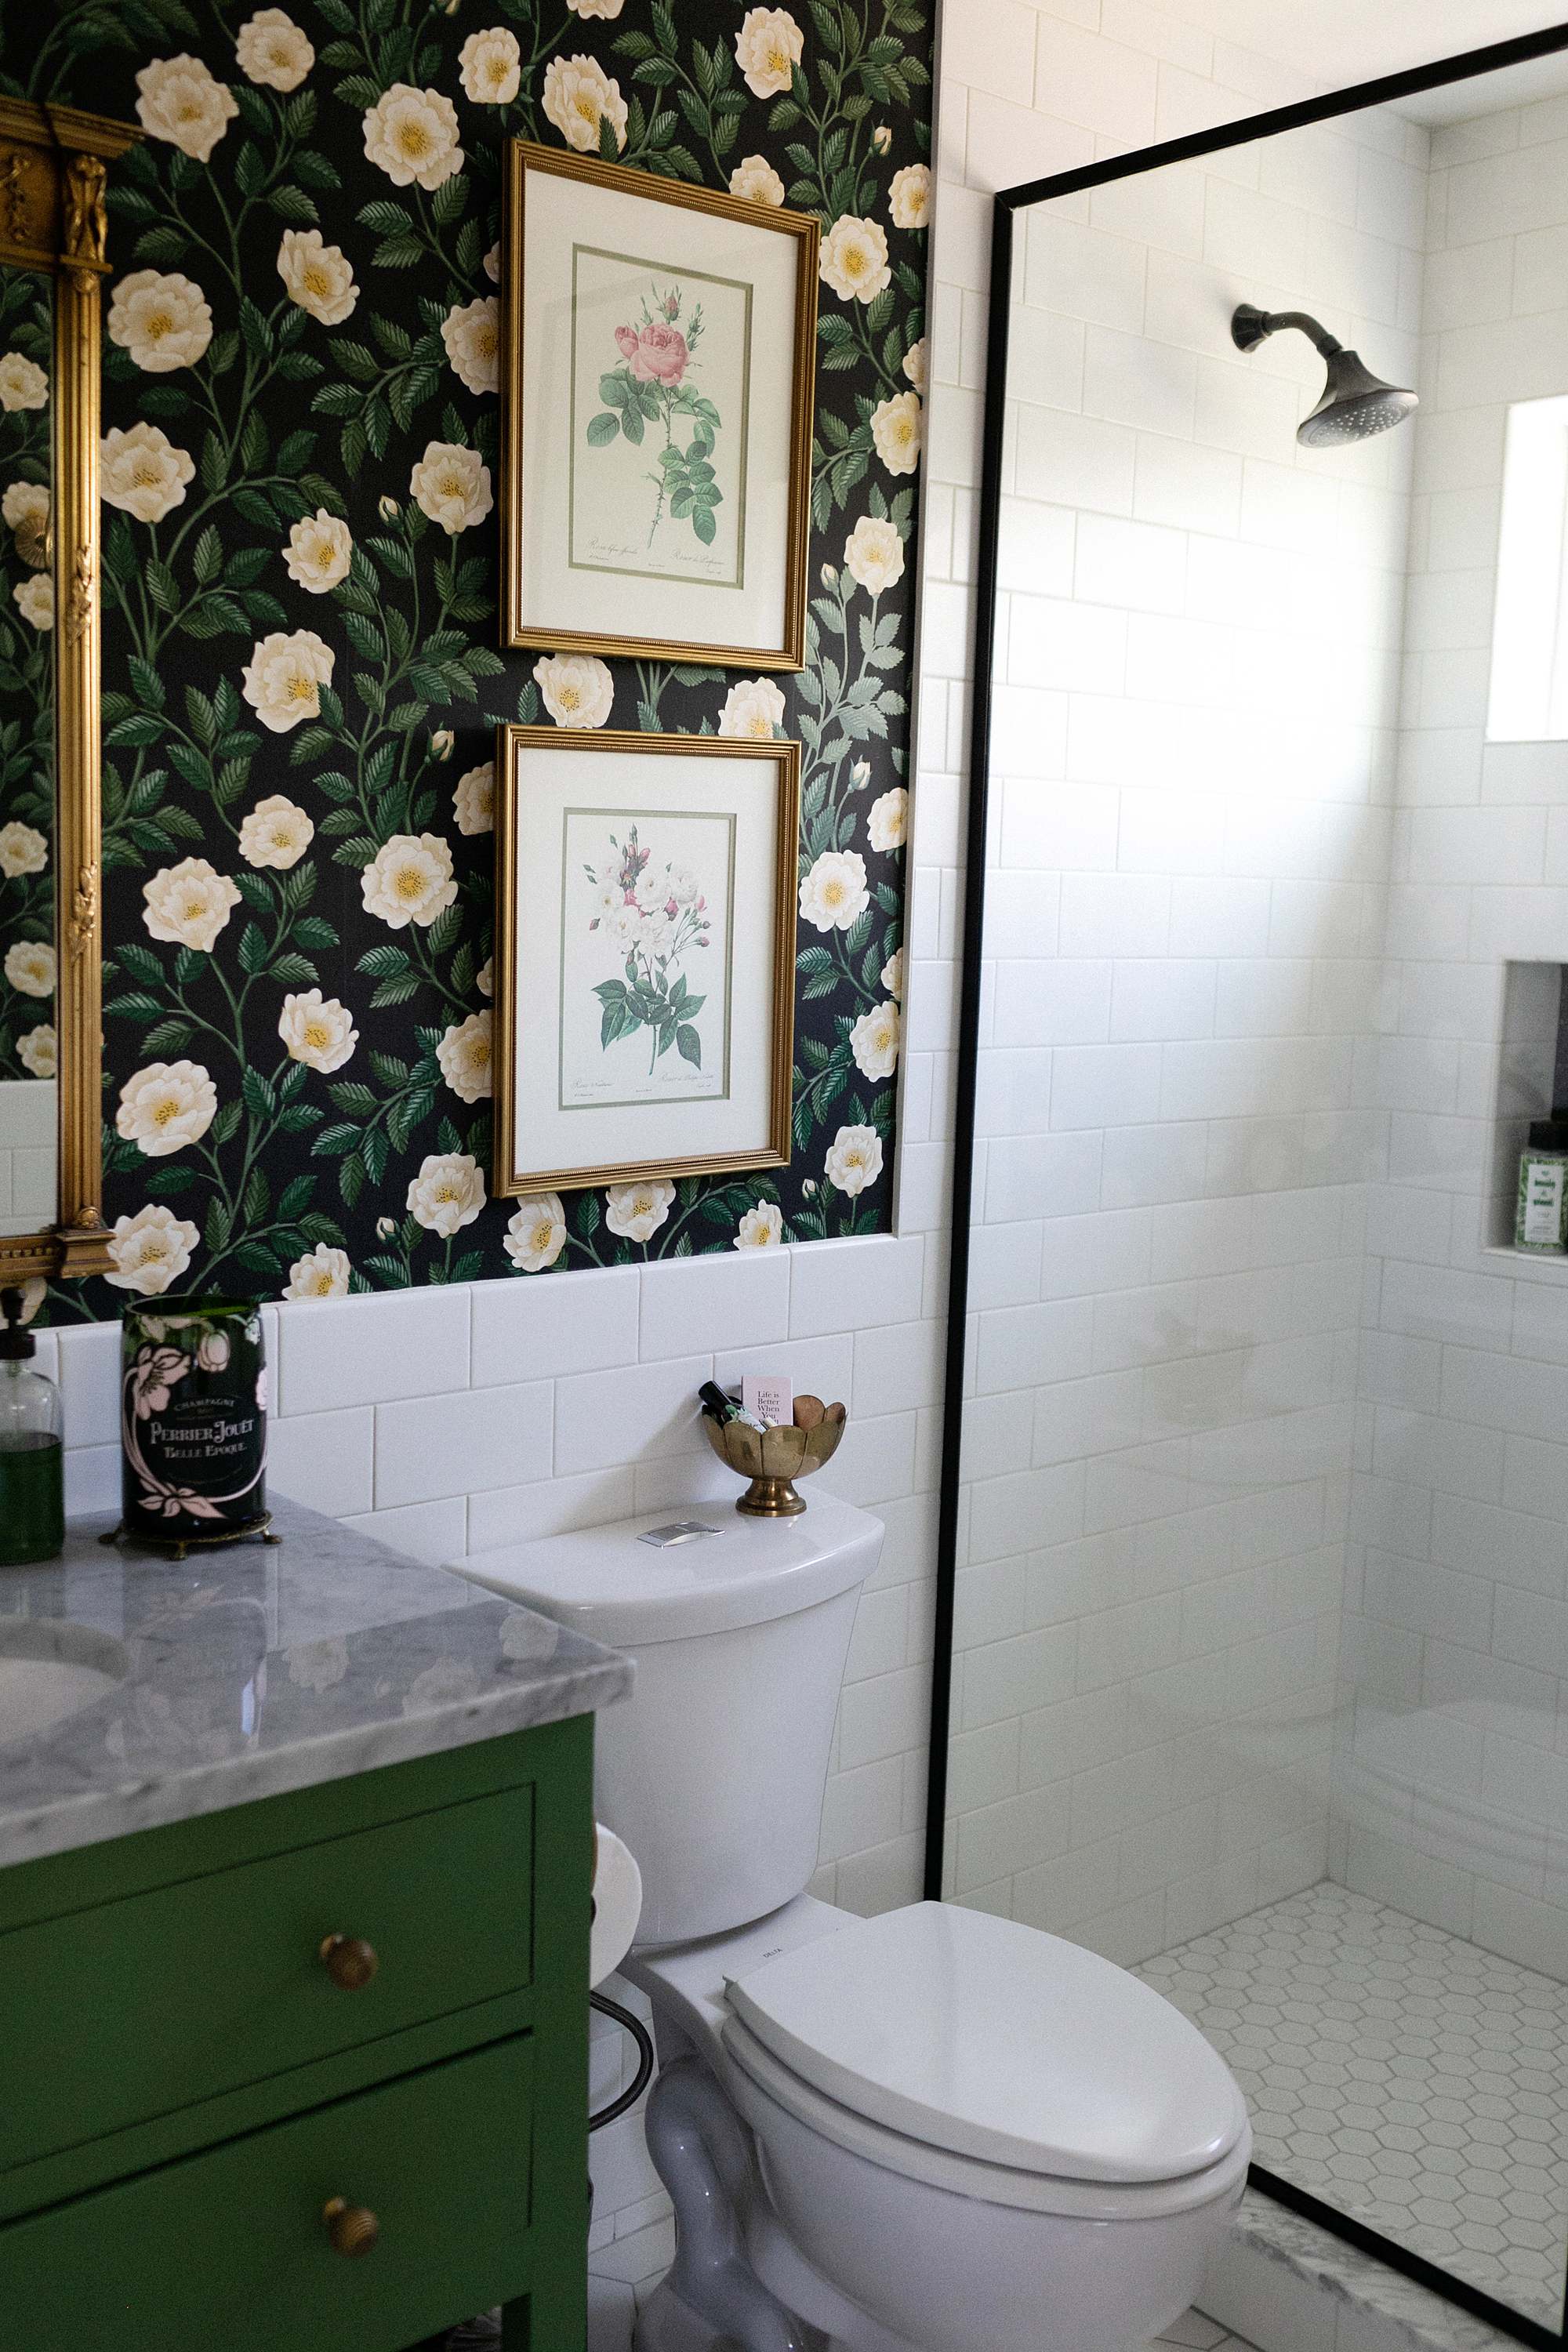 vintage rose prints on Cole and son Hampton roses wallpaper, green painted vanity